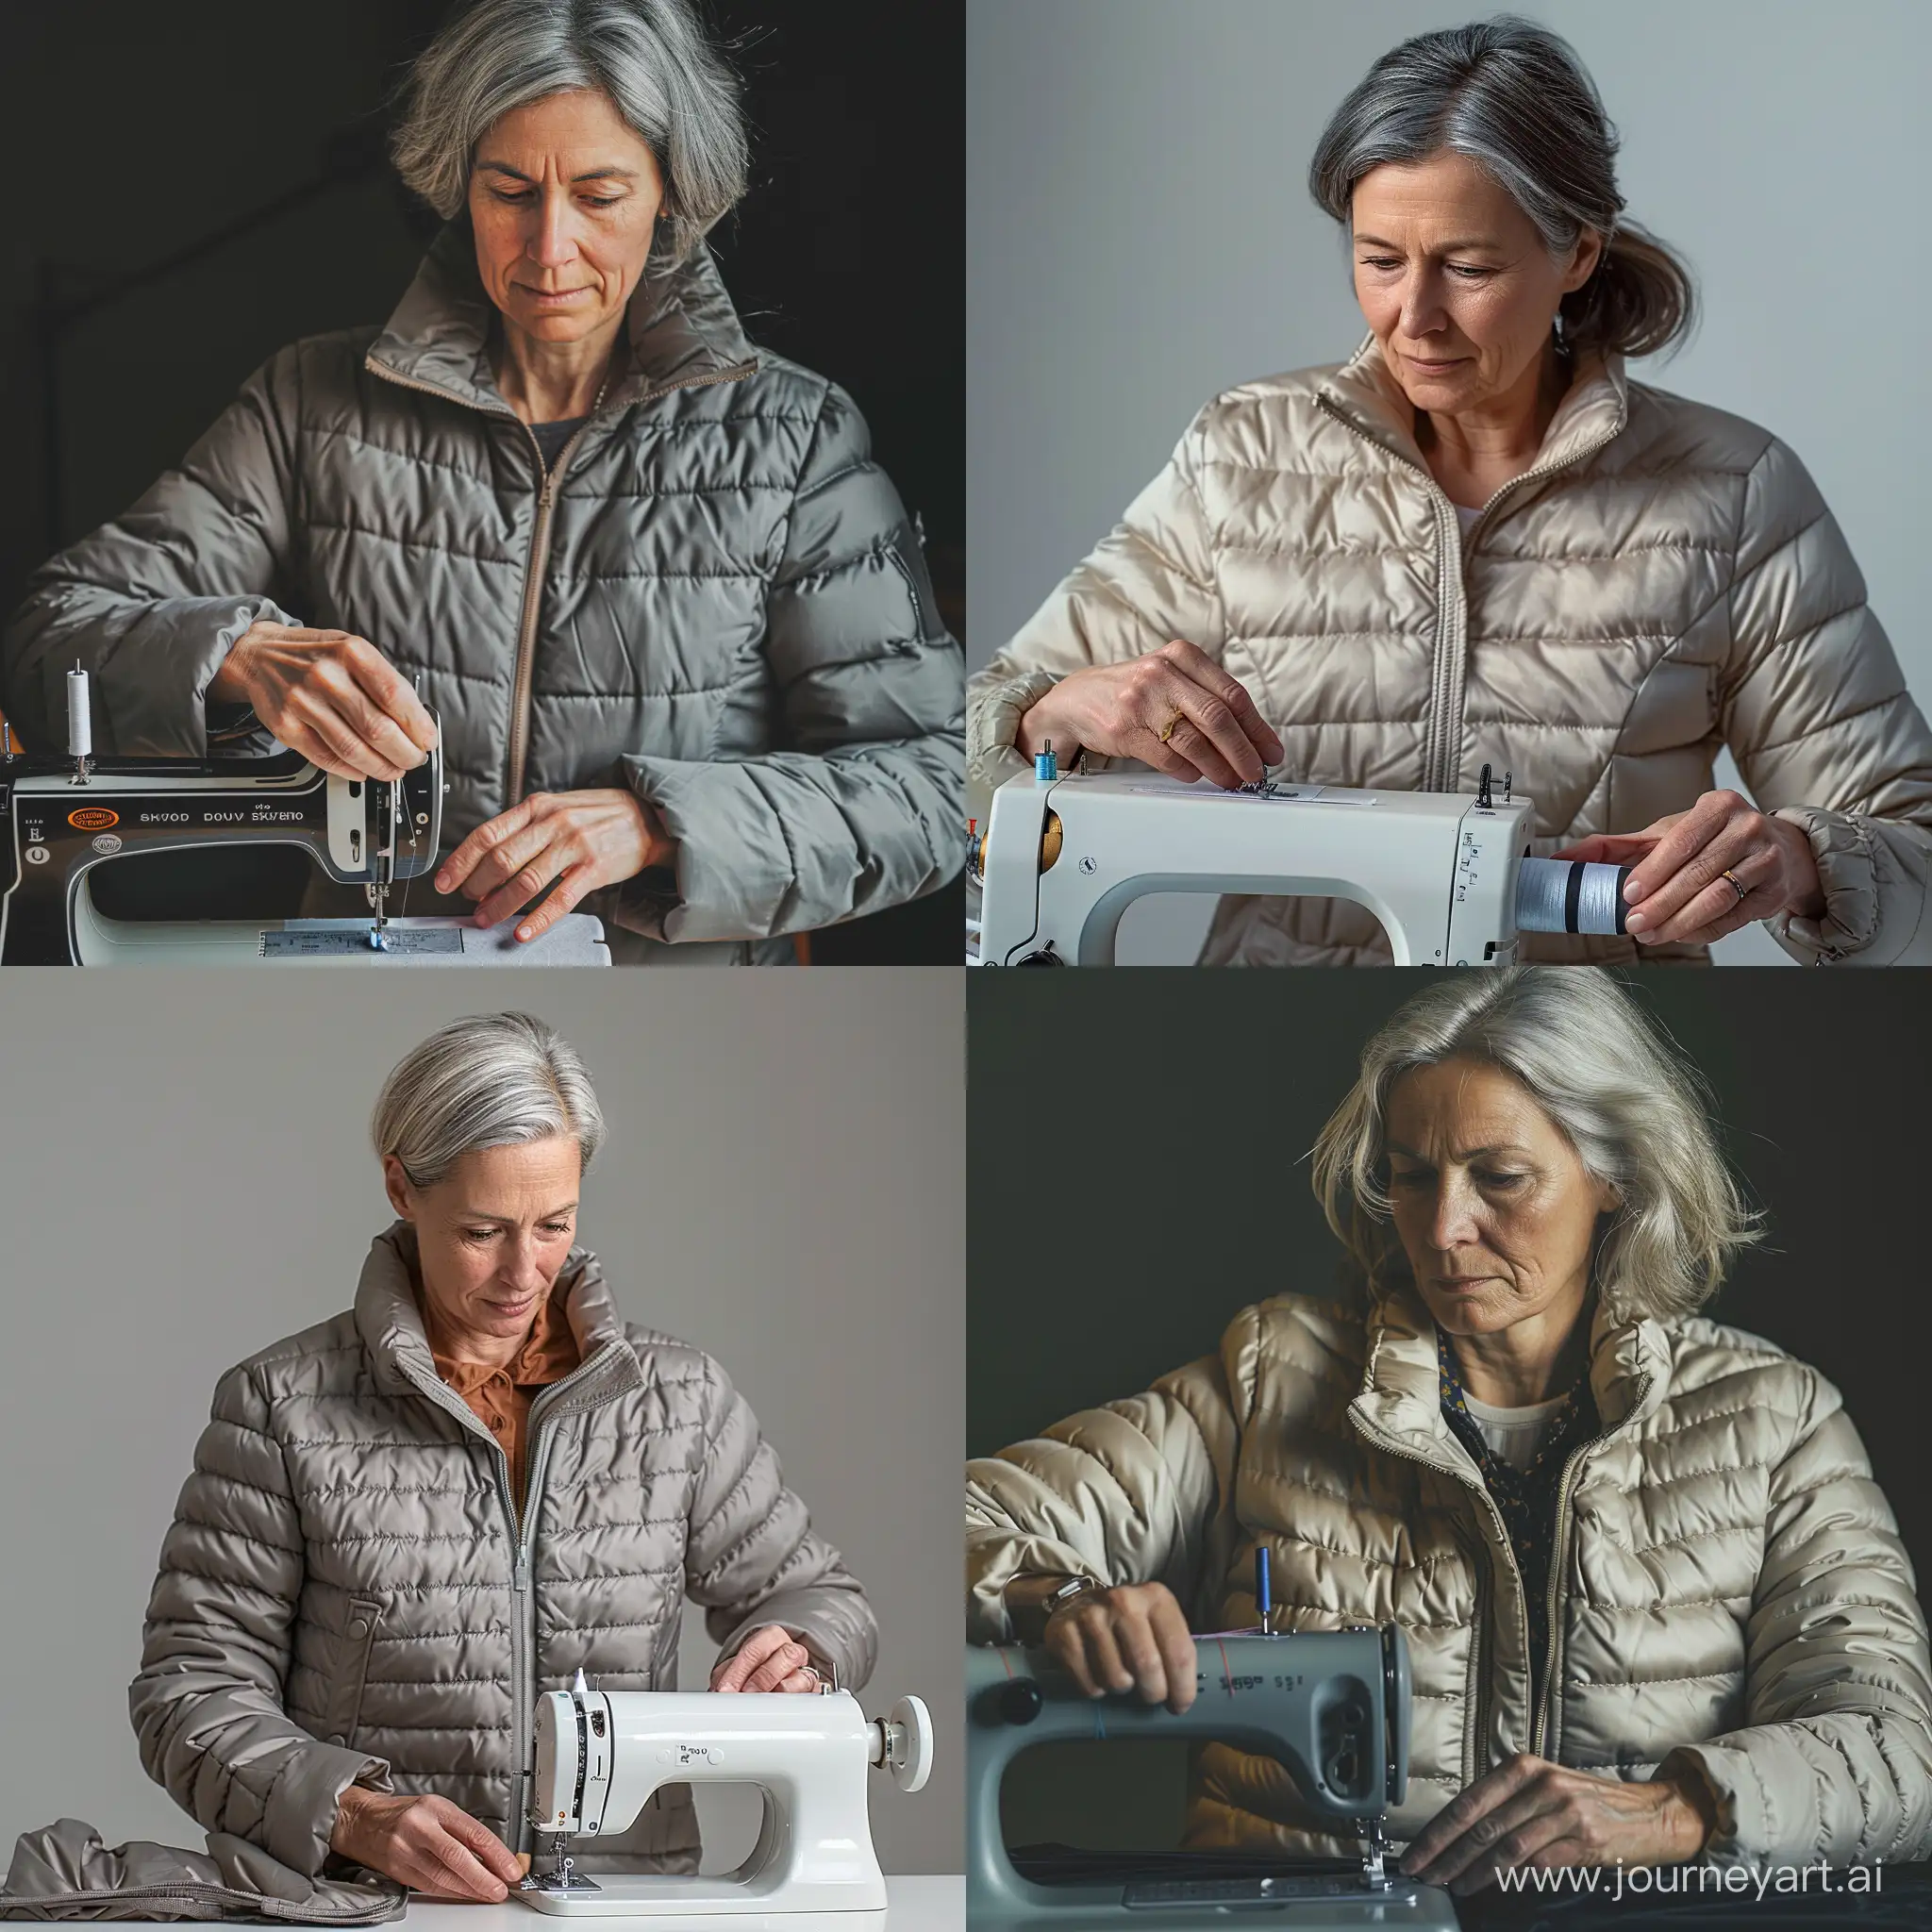 MiddleAged-Woman-Sewing-Down-Jacket-on-Machine